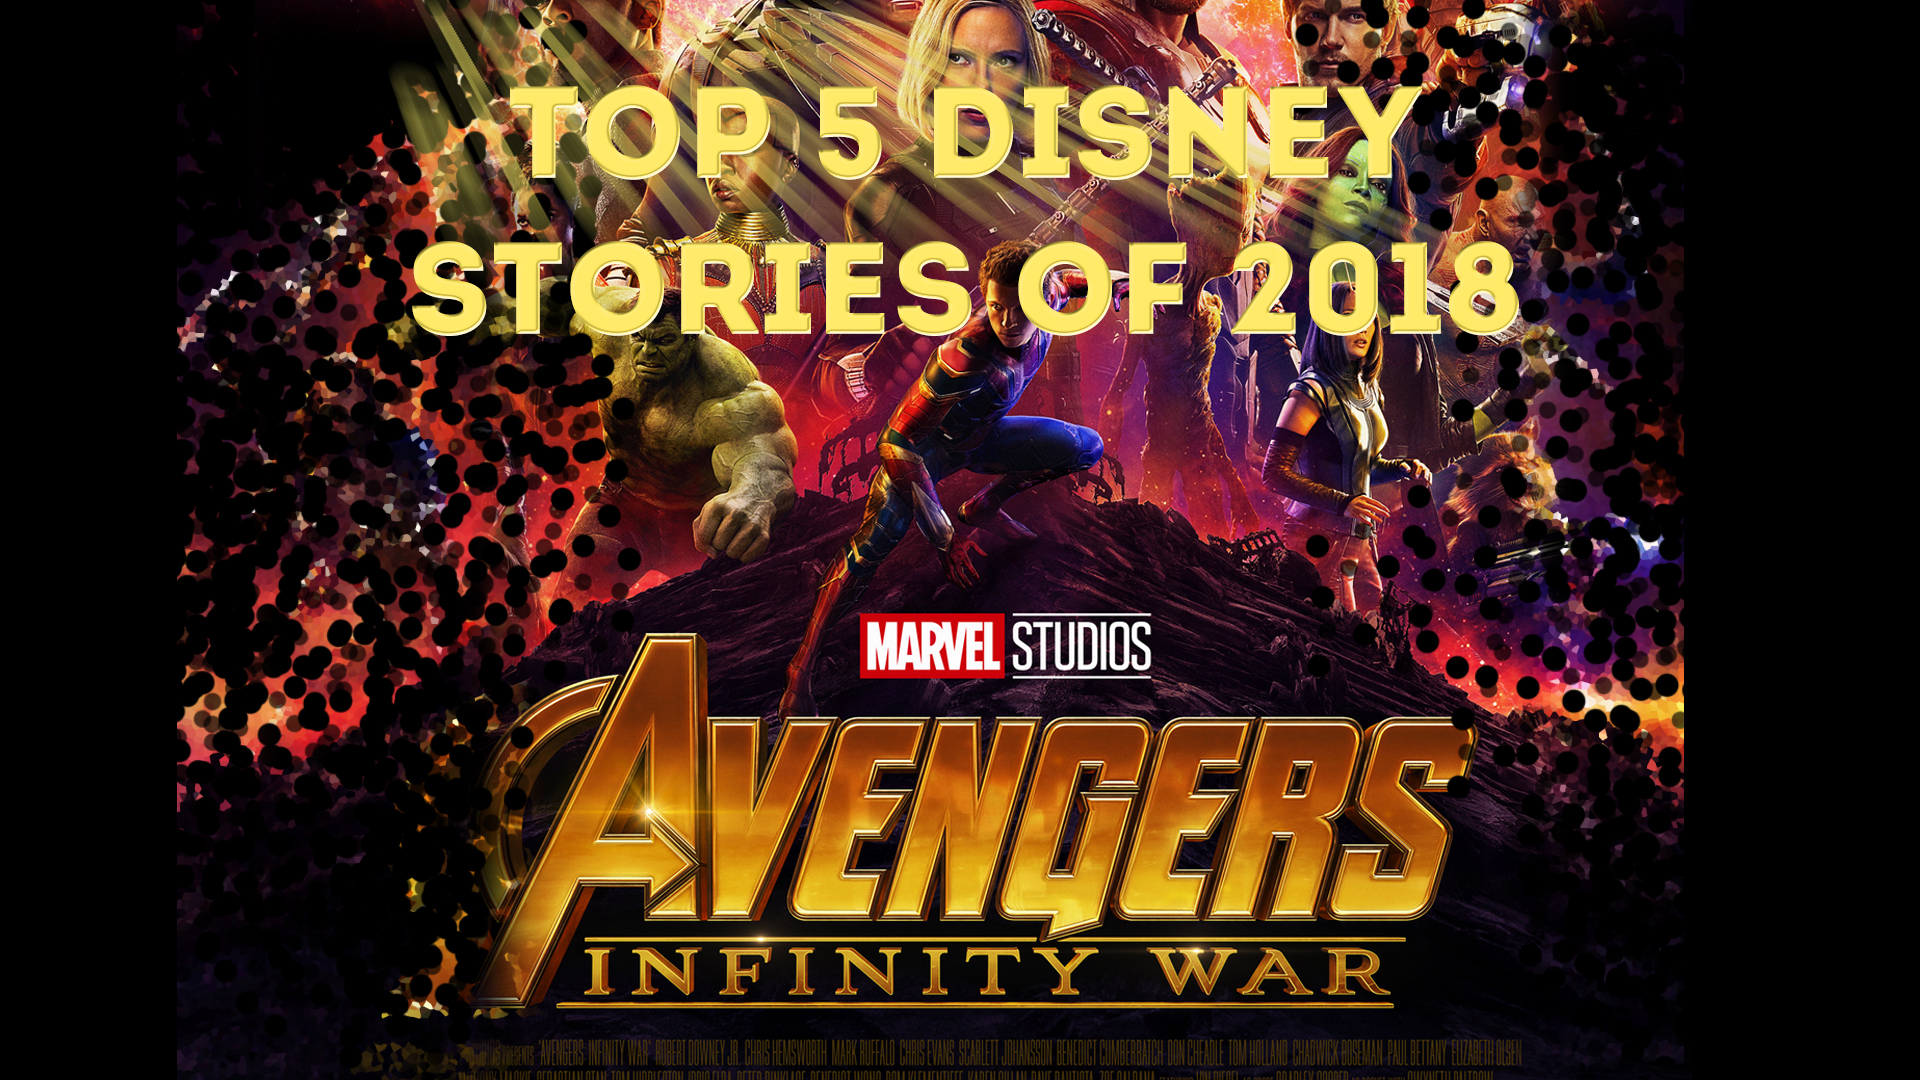 Here’s Why Avengers: Infinity War is the Biggest Disney Story of 2018 – Top 5 Disney Stories of 2018